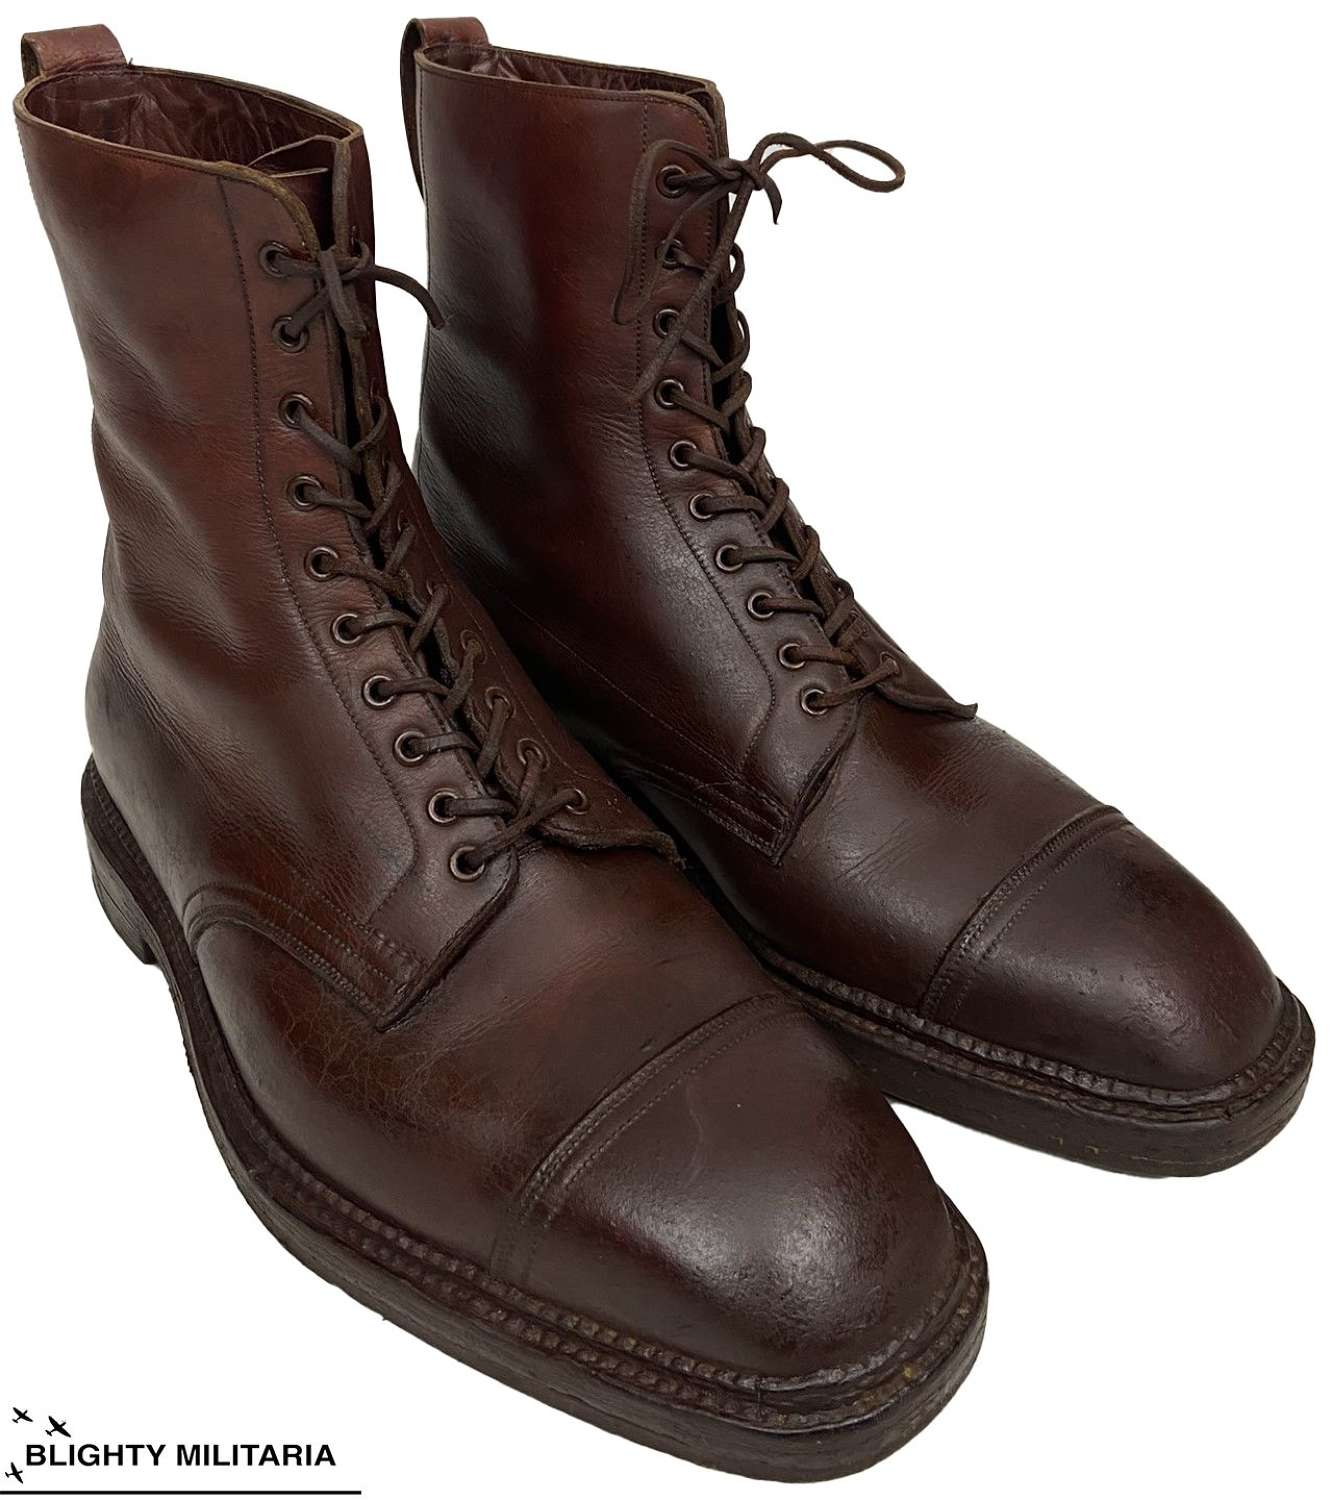 Original 1940s British Brown Leather Ankle Boots by Foster & Son - 10